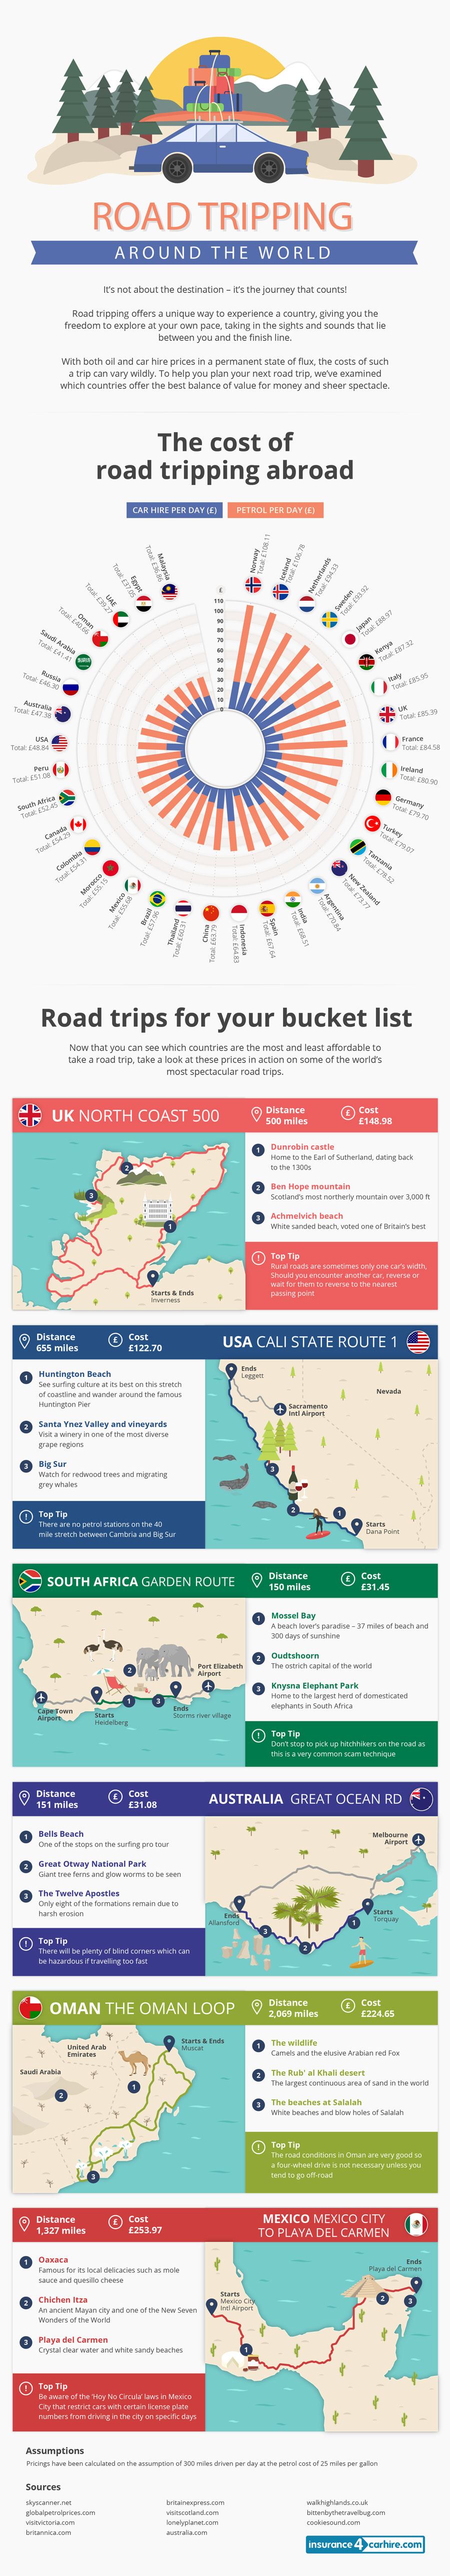 road-trips-infographic